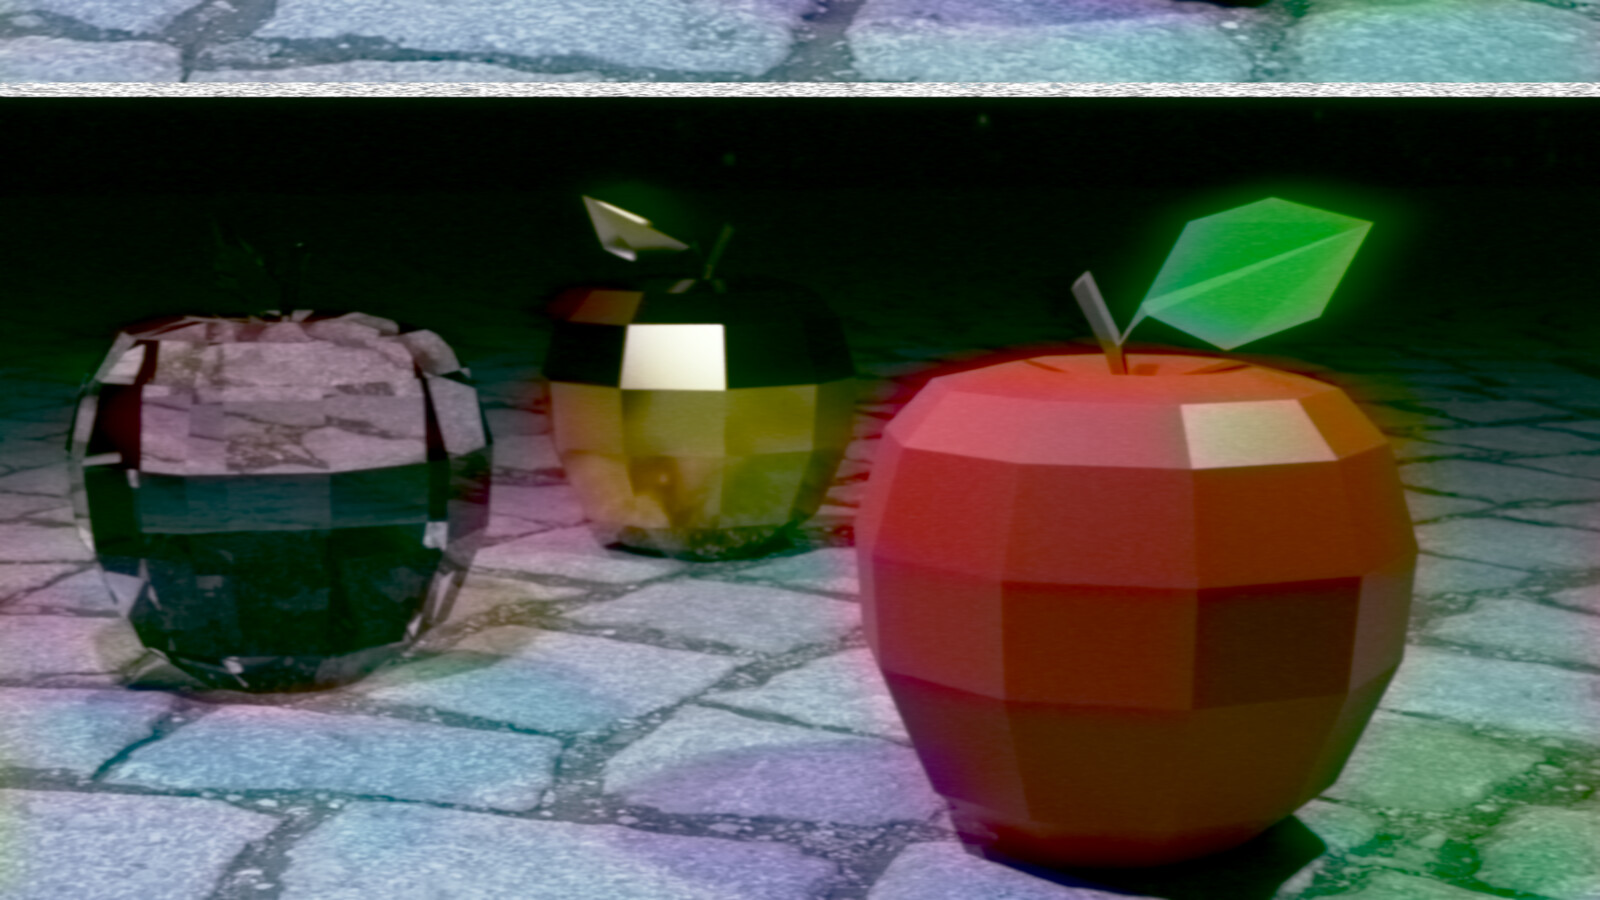 Three apples of various material.